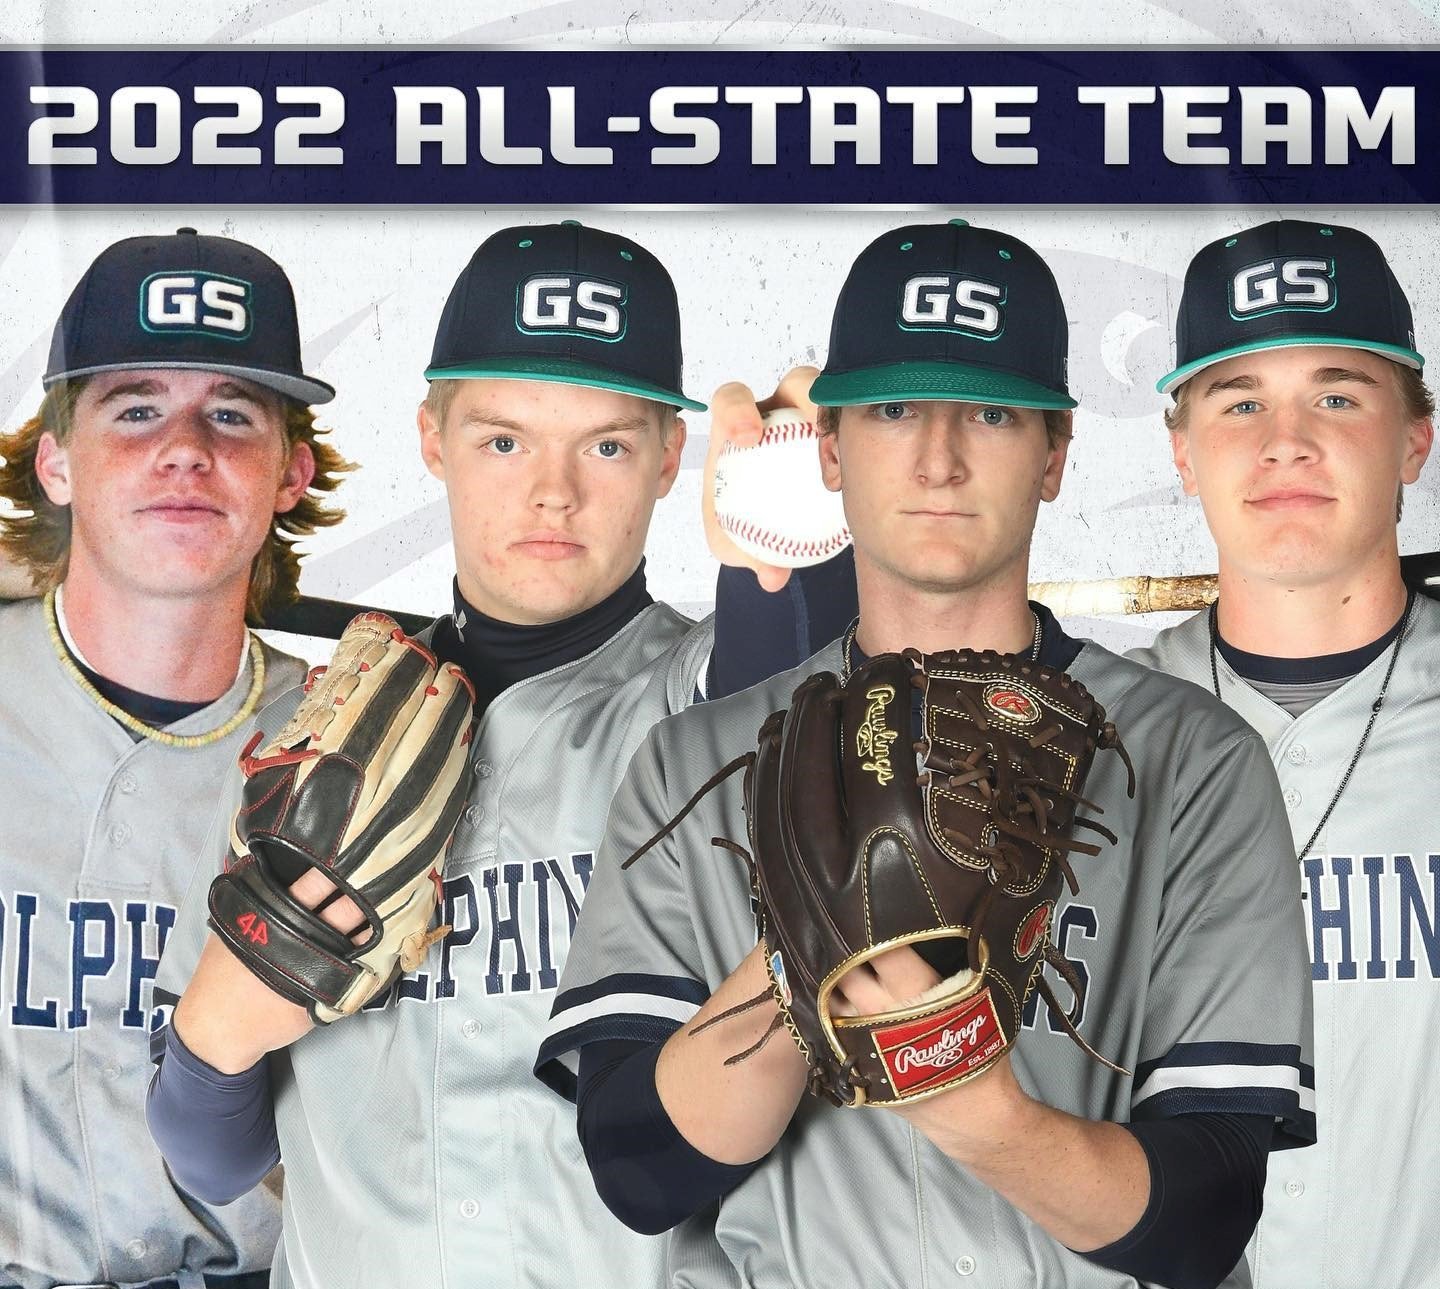 Joseph Stephens, Case Hager, Thrasher Steed and Marc Stephens represented the Gulf Shores Dolphins on the all-state baseball team selected by the Alabama Sports Writers Association. The former three made the first-team and Marc Stephens was an all-state honorable mention.